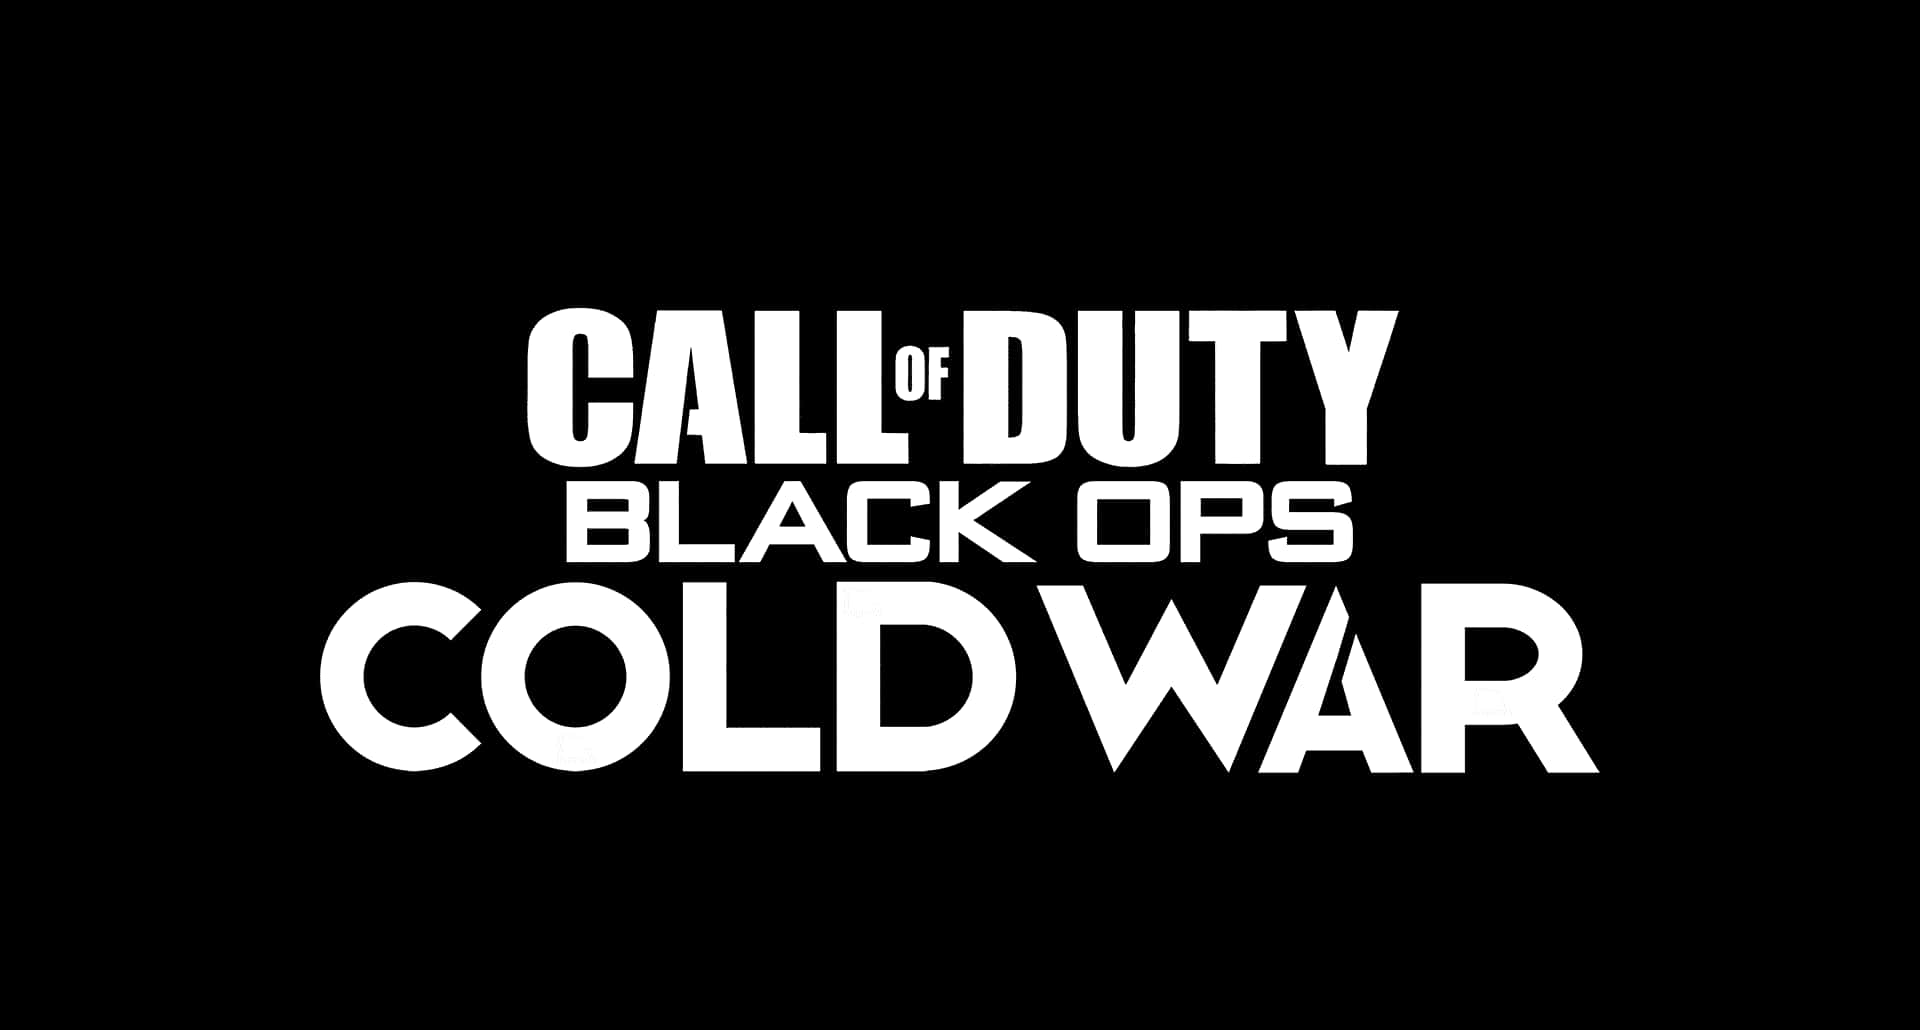 Dive into the Action of Call of Duty: Black Ops Cold War